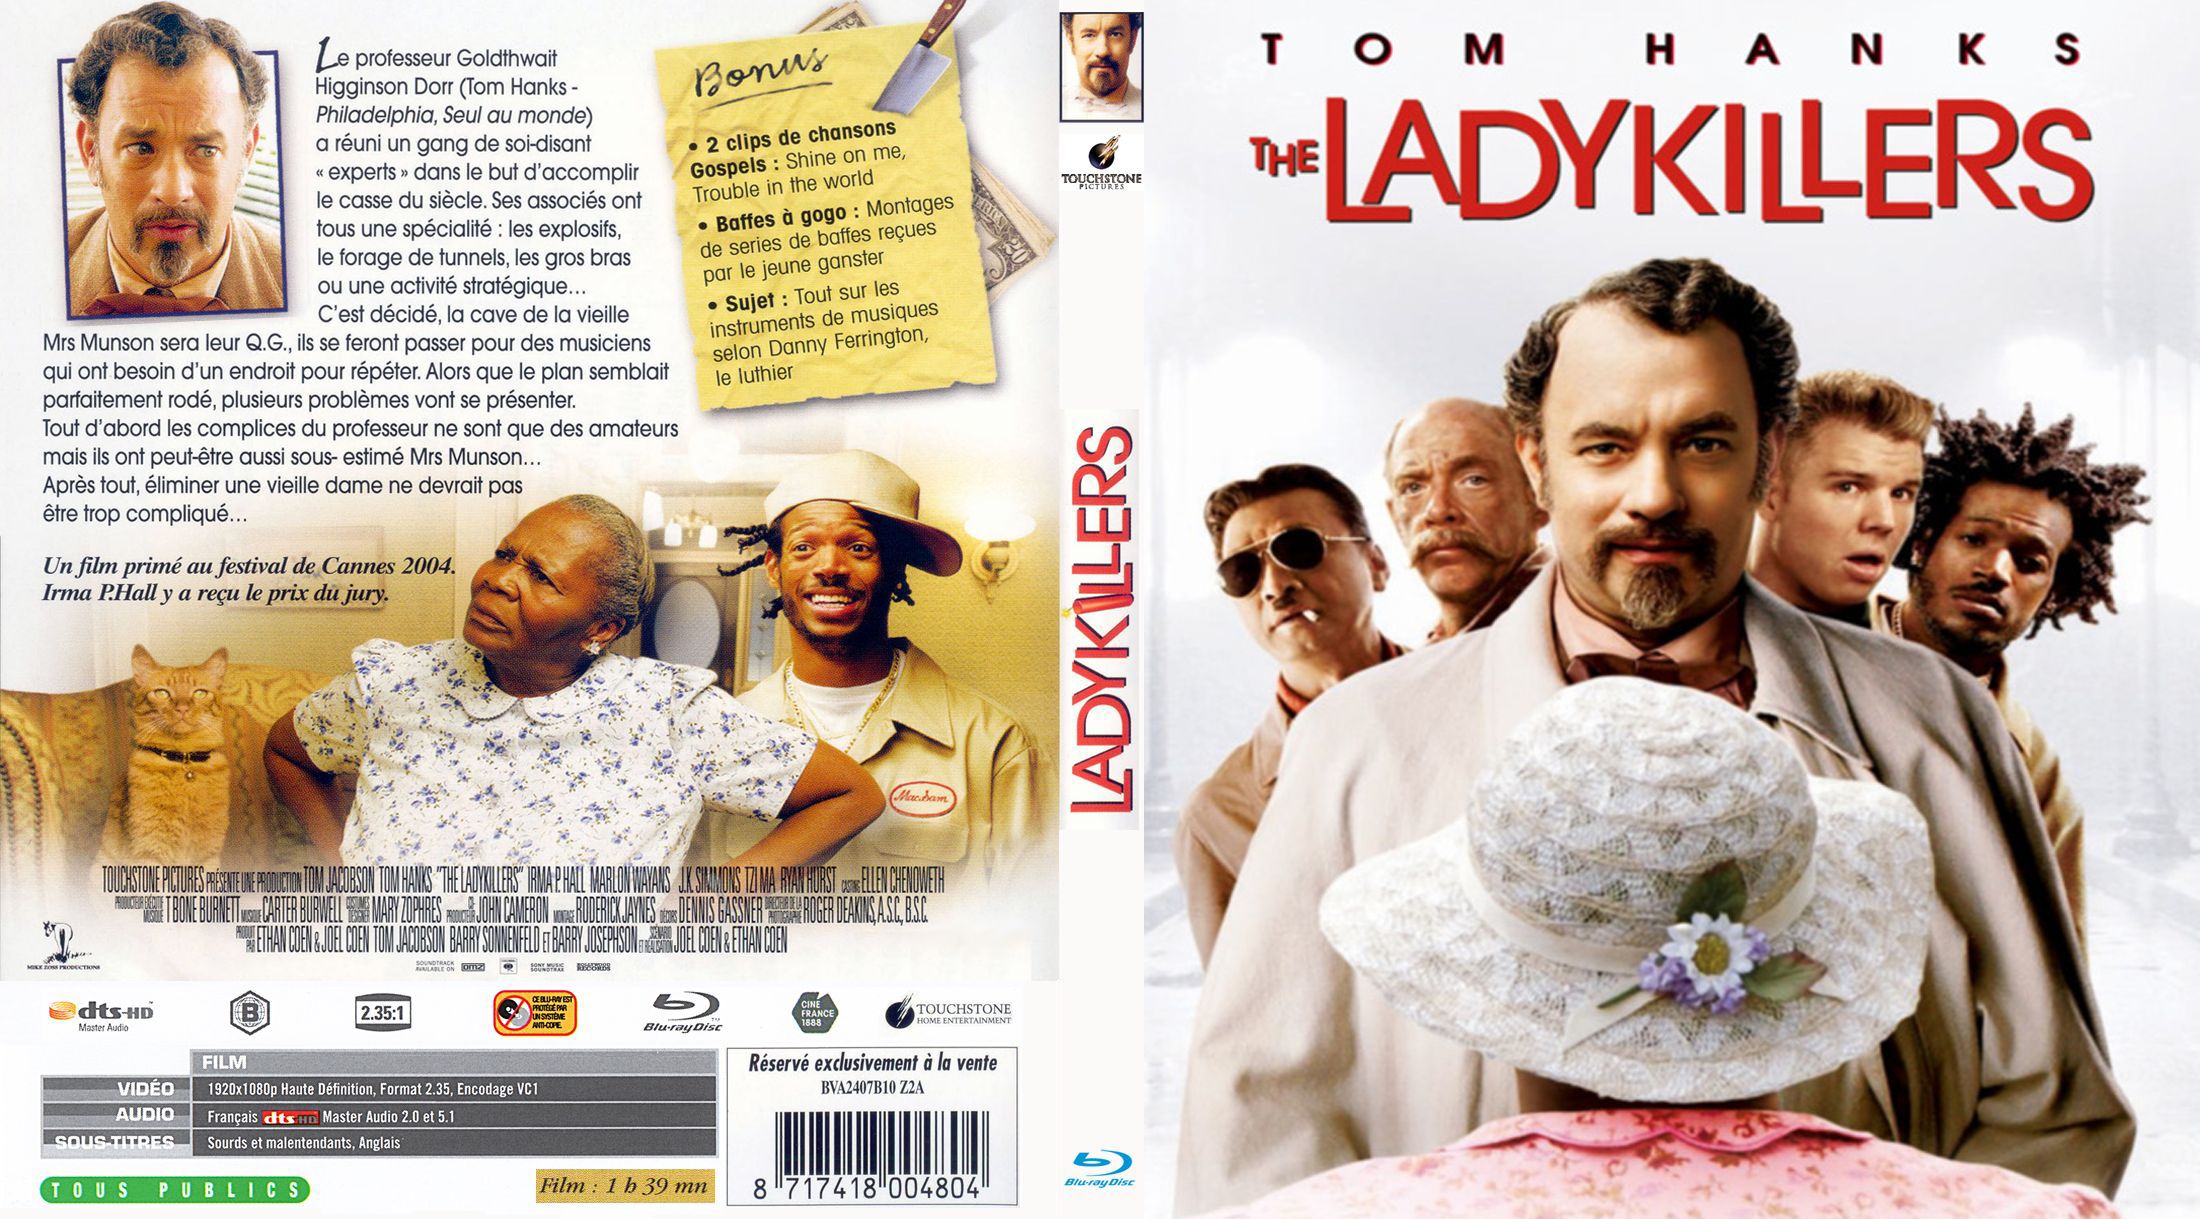 Jaquette DVD Ladykillers (BLU-RAY)